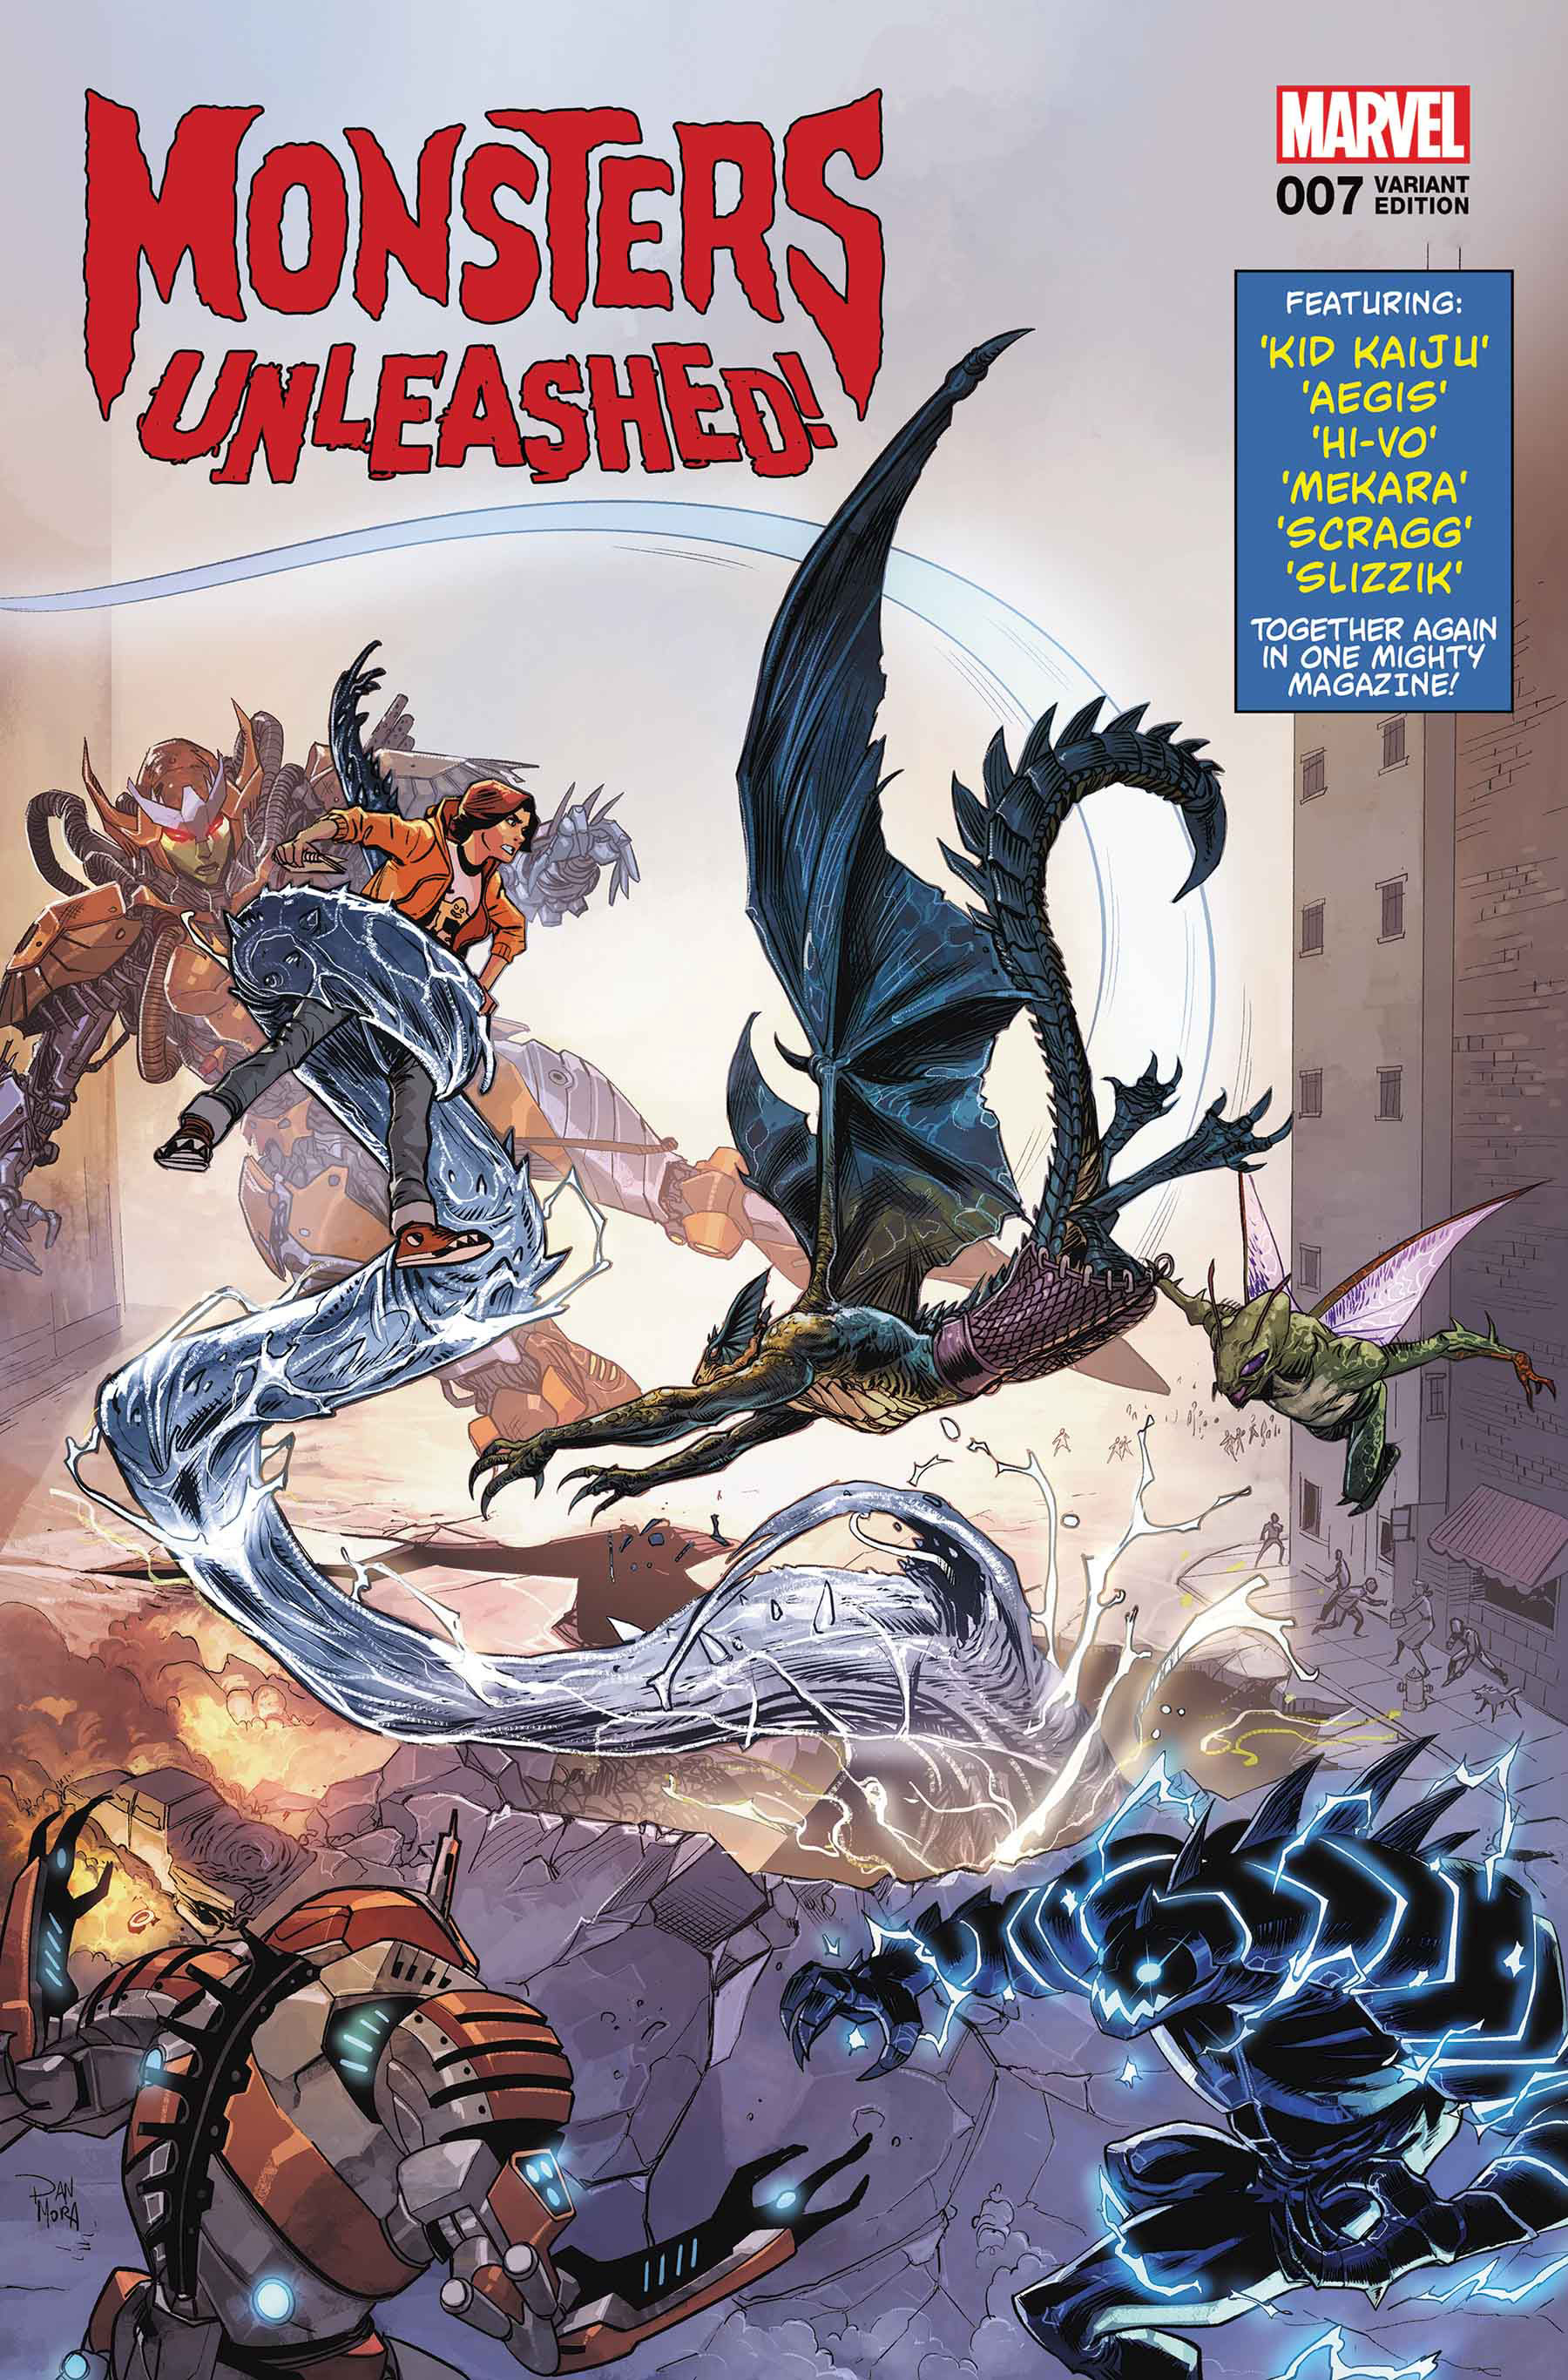 MONSTERS UNLEASHED #7 VARIANT